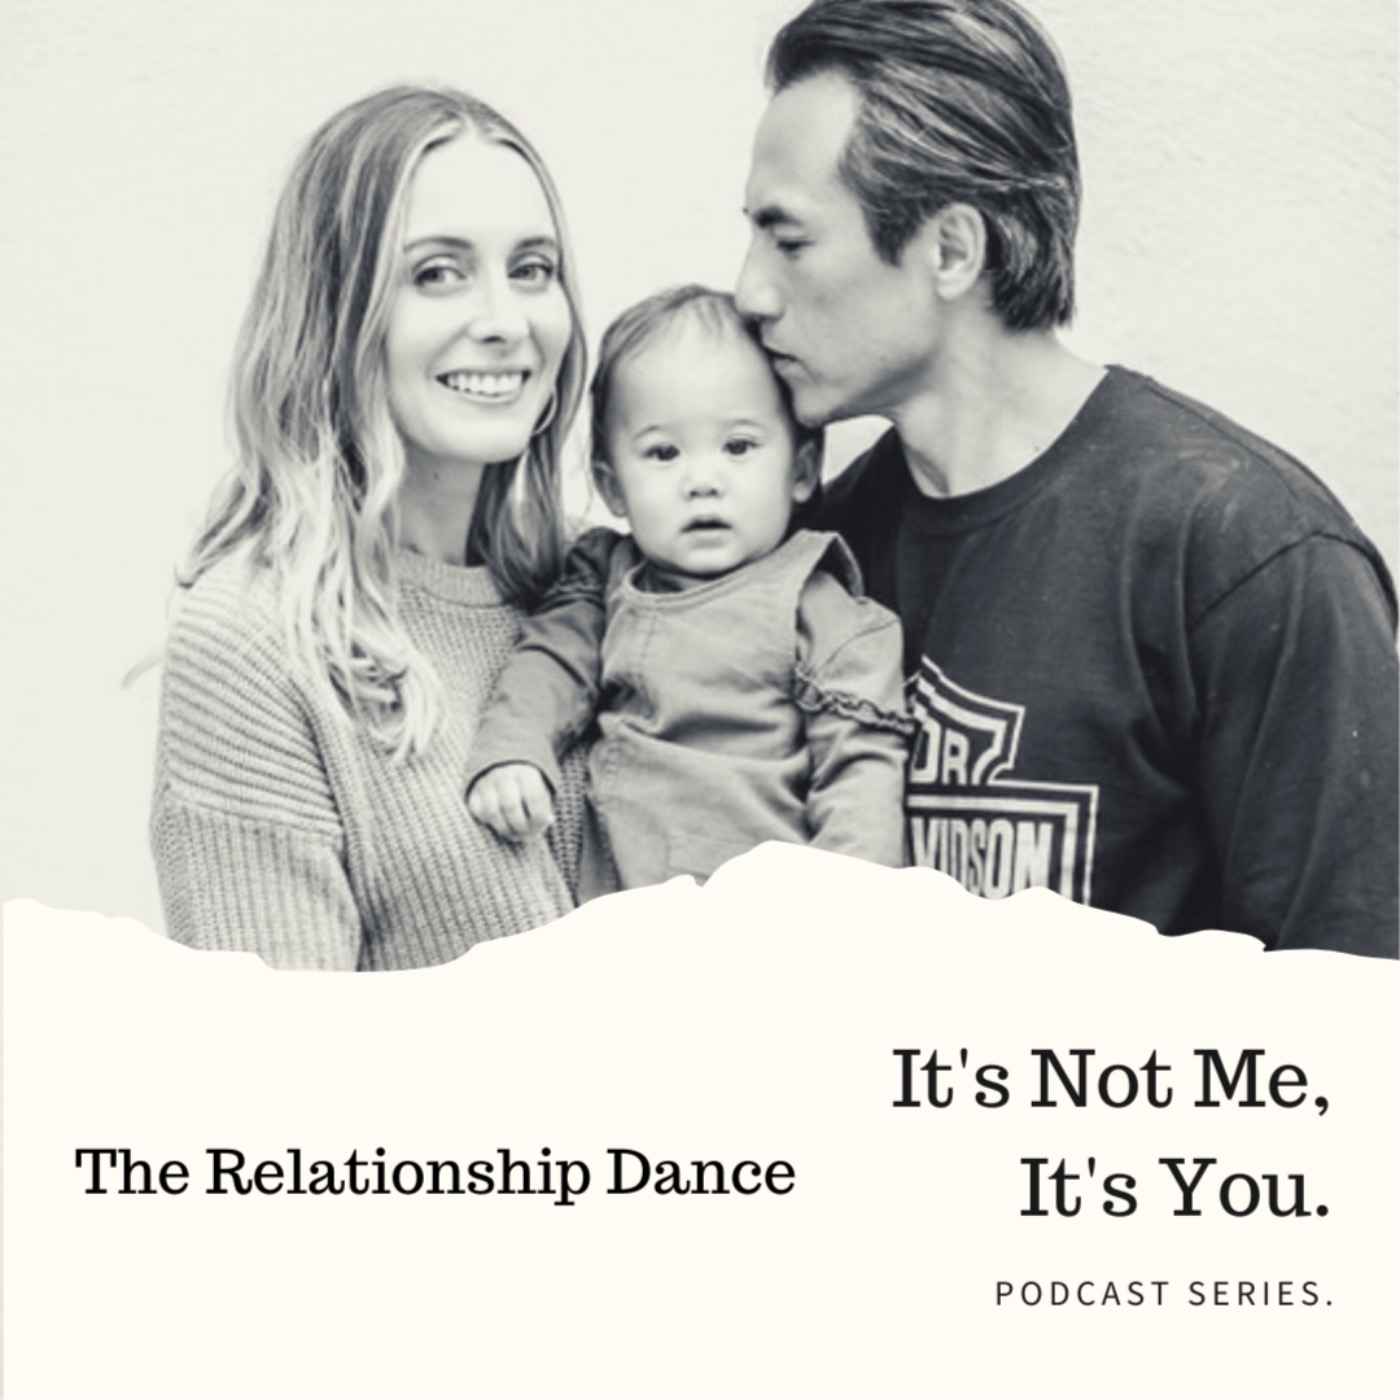 It's Not Me, It's You: The Relationship Dance